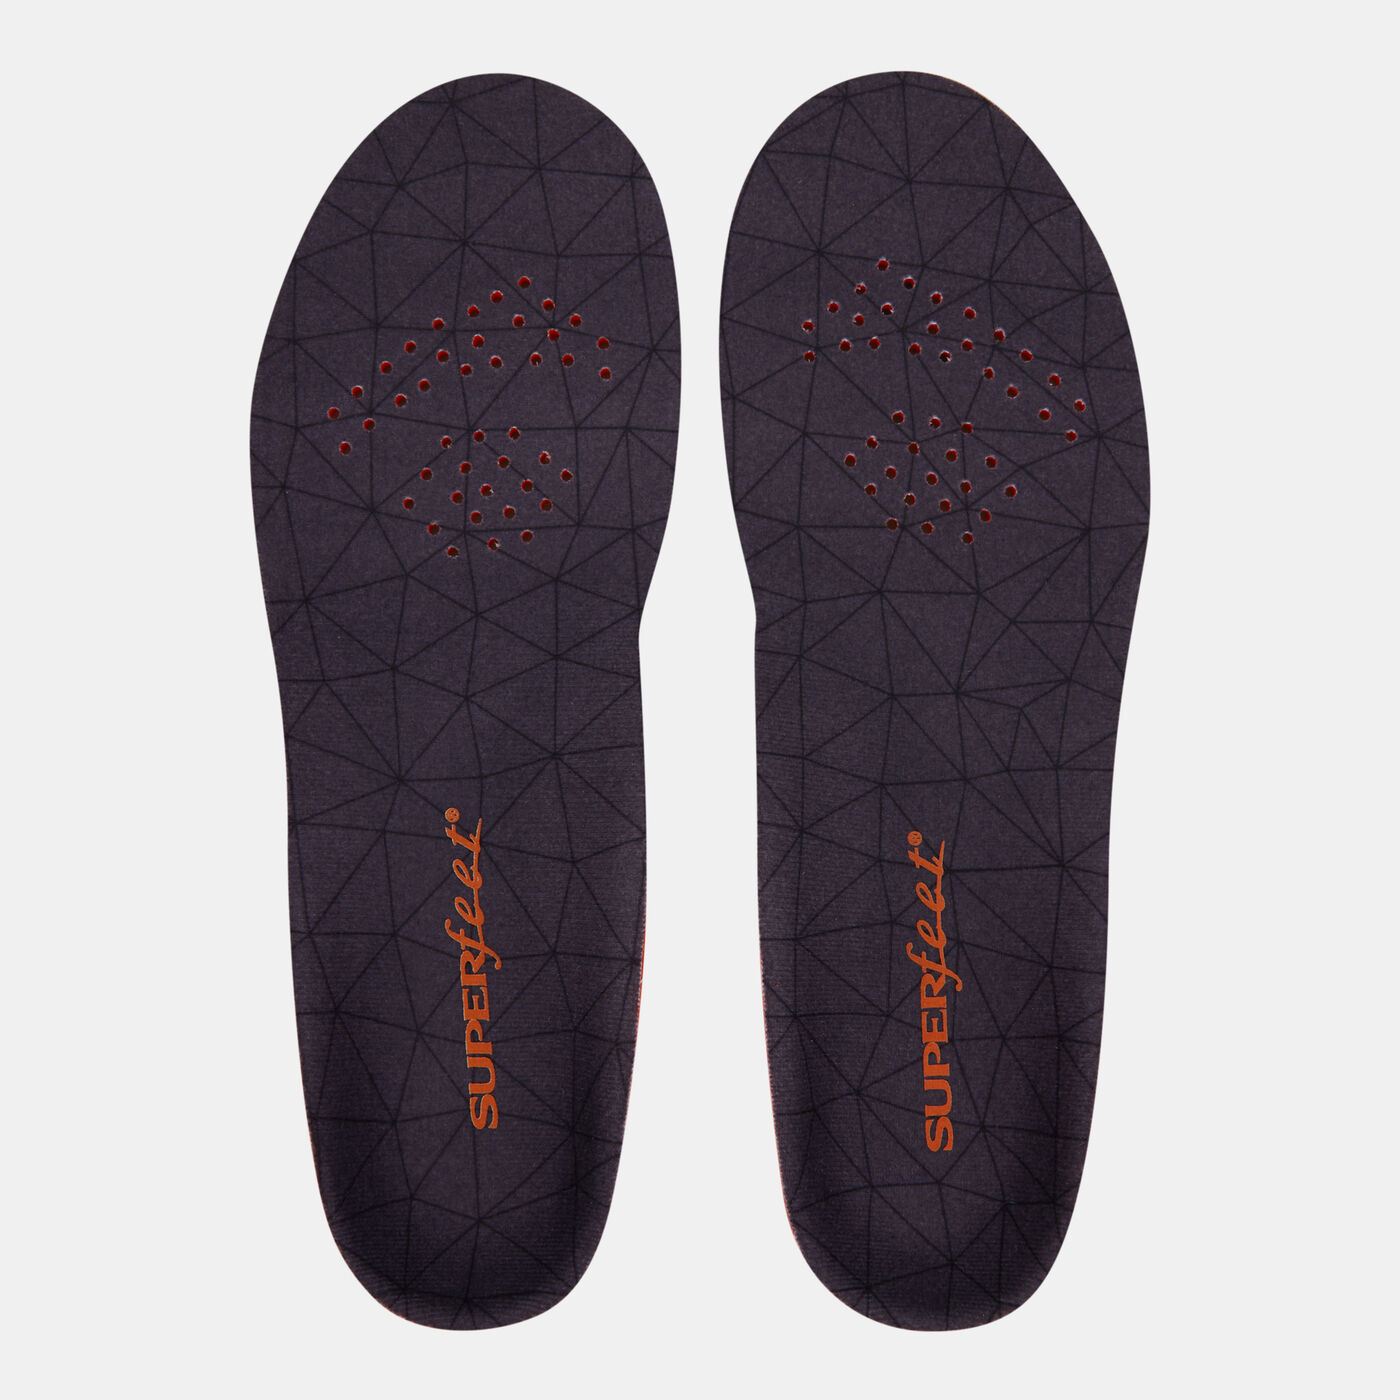 Flexmed Insole